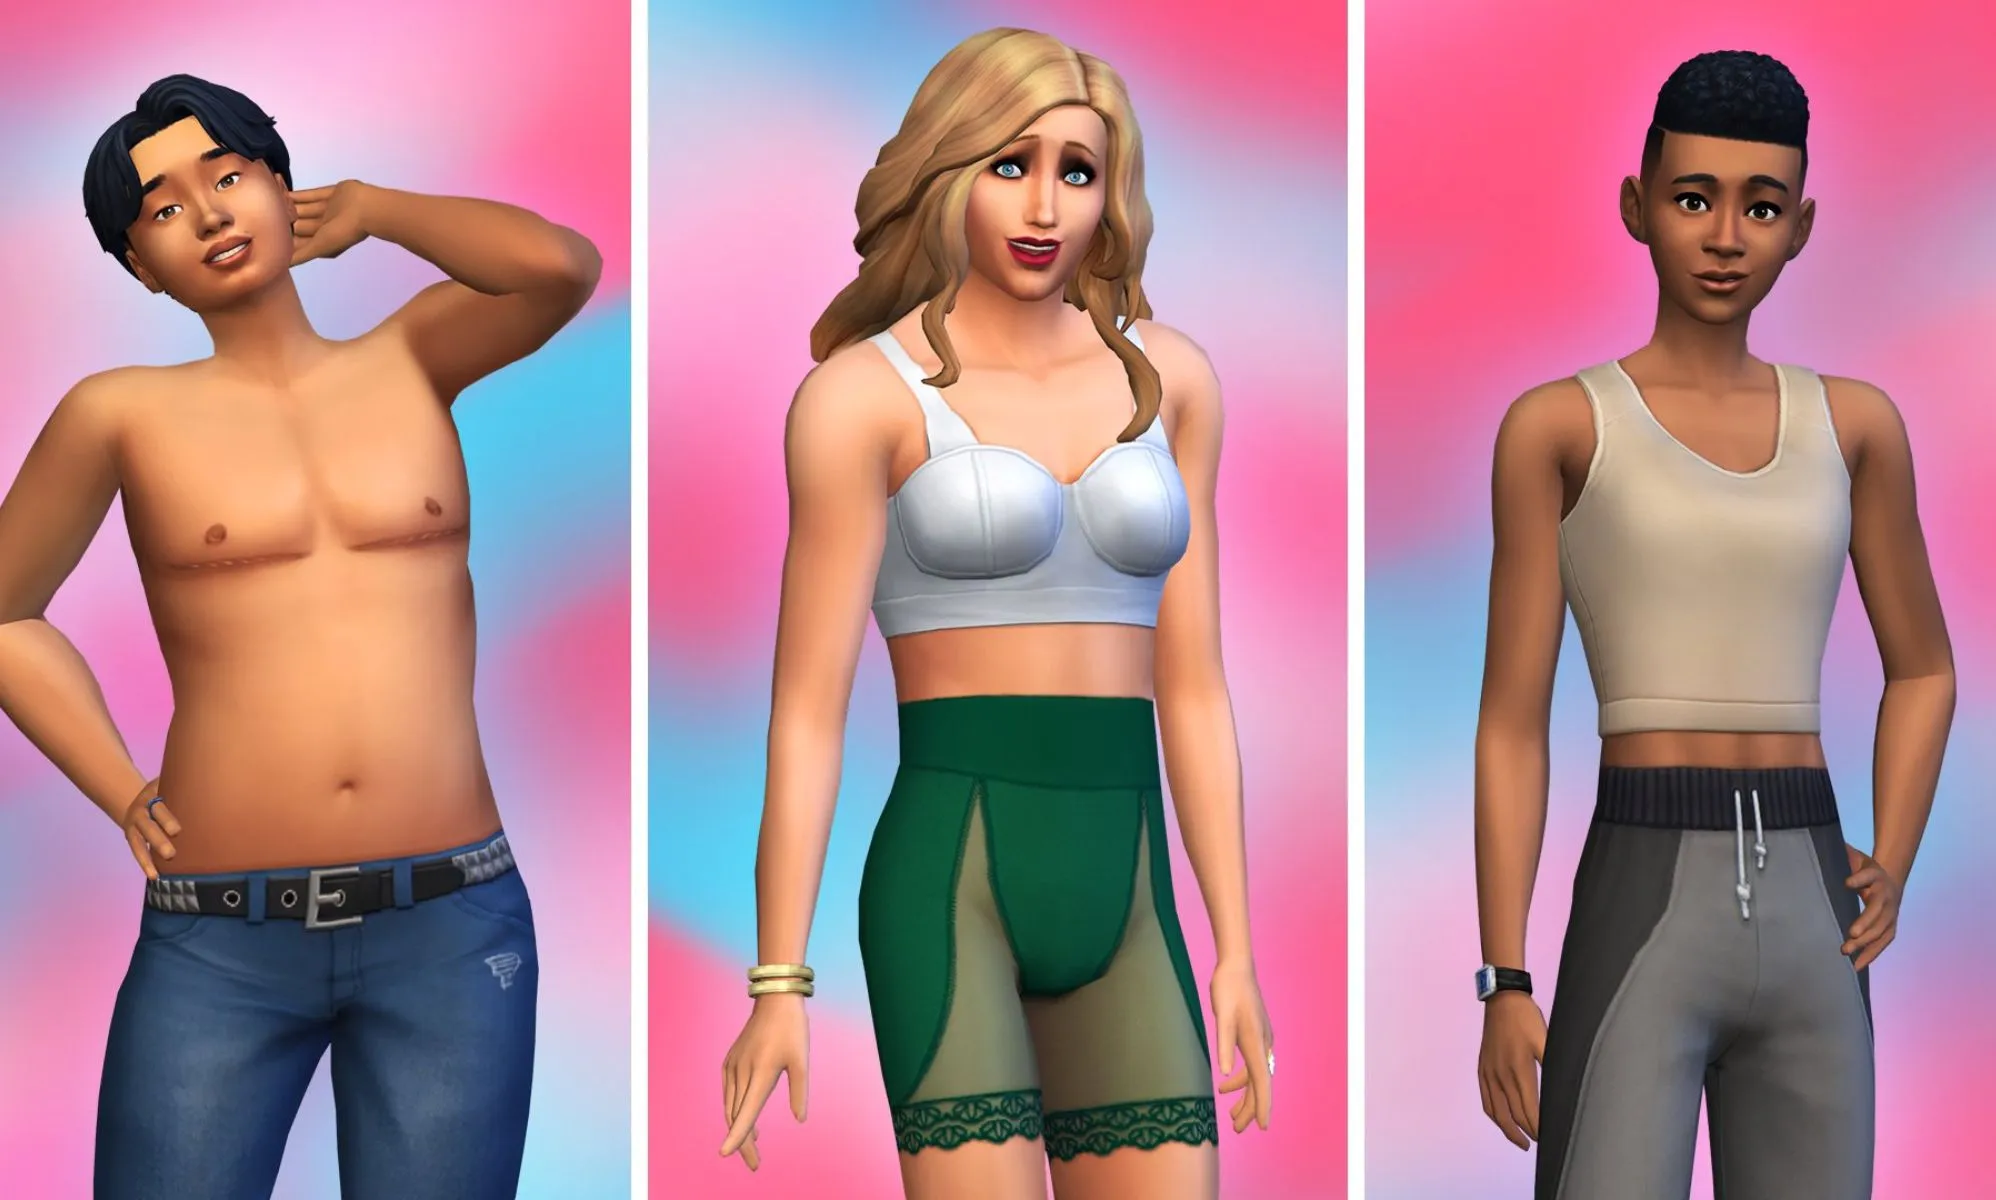 The Sims introduces trans characters with top surgery scars